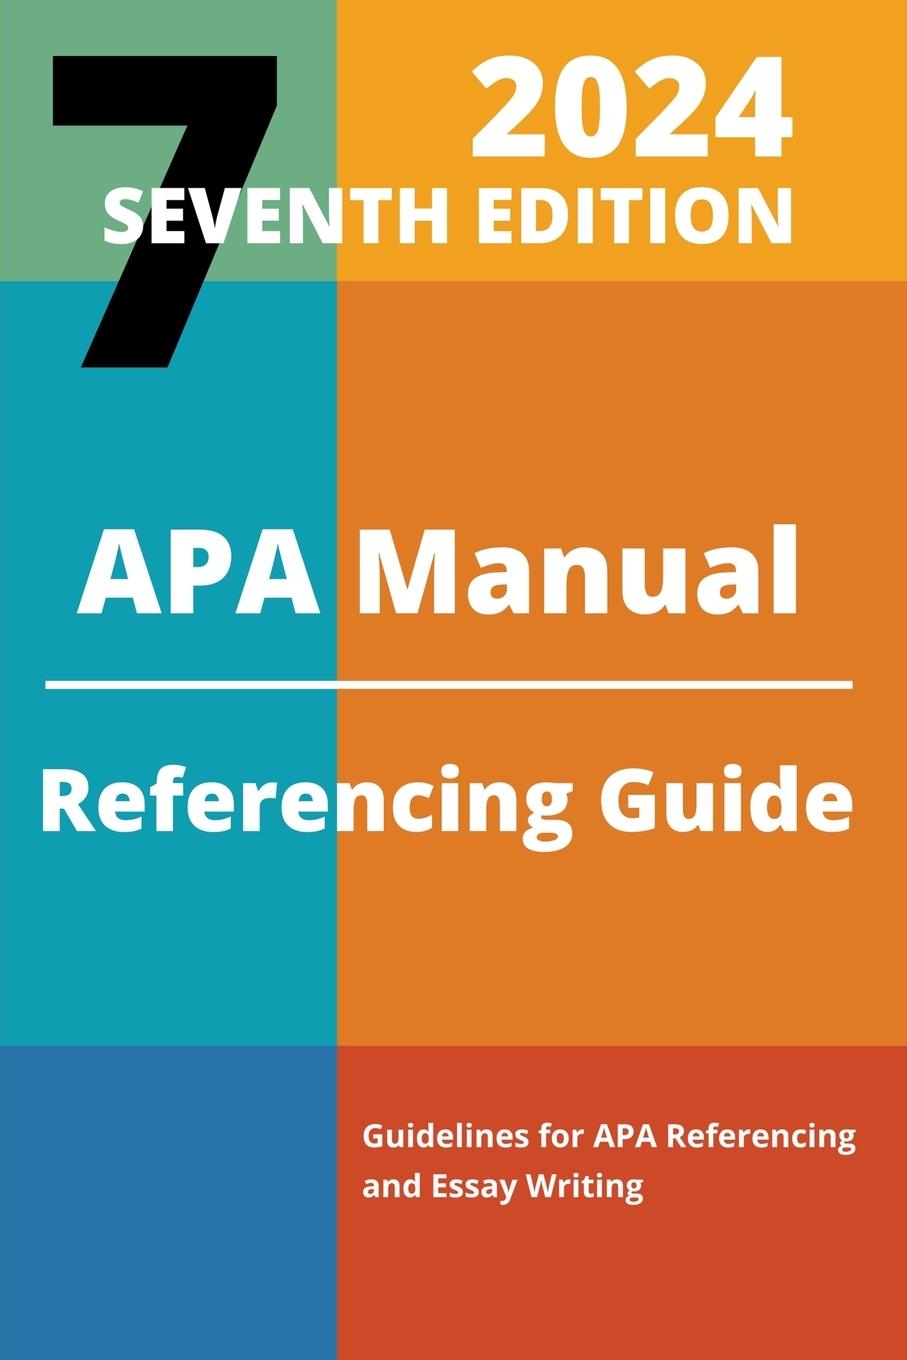 Book APA Manual 7th Edition 2024 Referencing Guide 